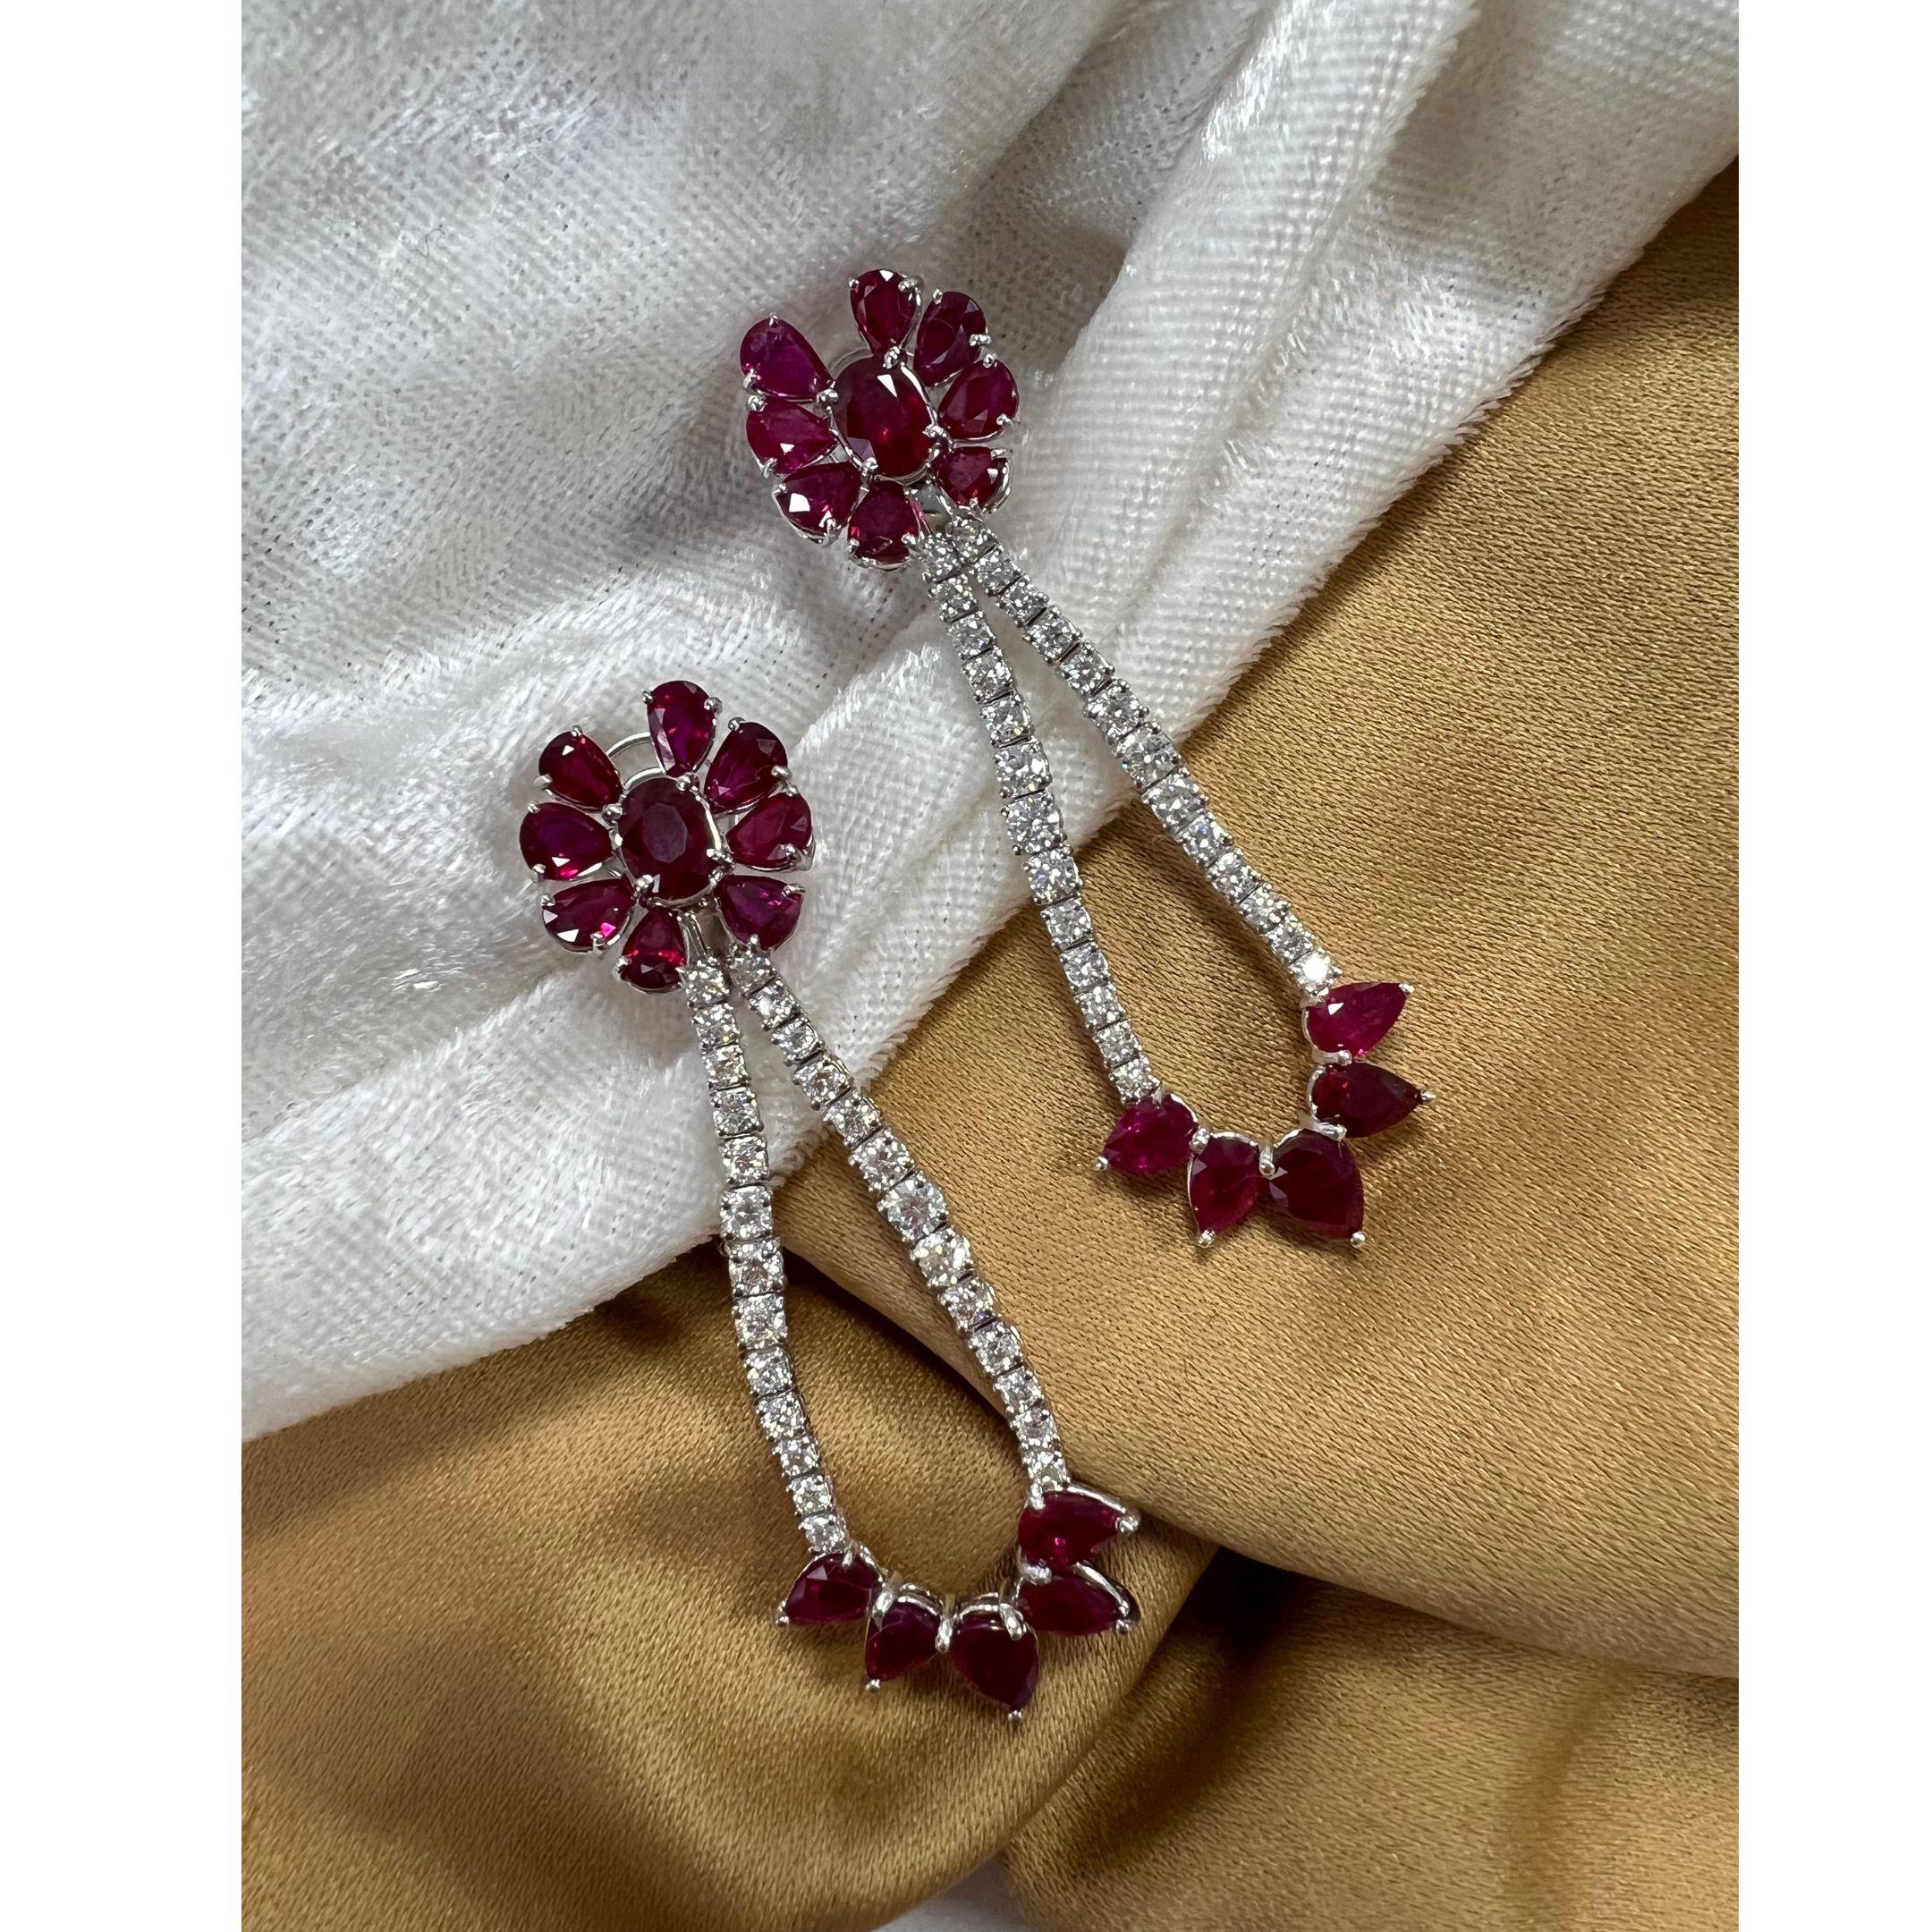 Contemporary 16.27 Carat Ruby Dangle Earrings, 2.63 Carat Diamonds, 18K White Gold, Bridal For Sale